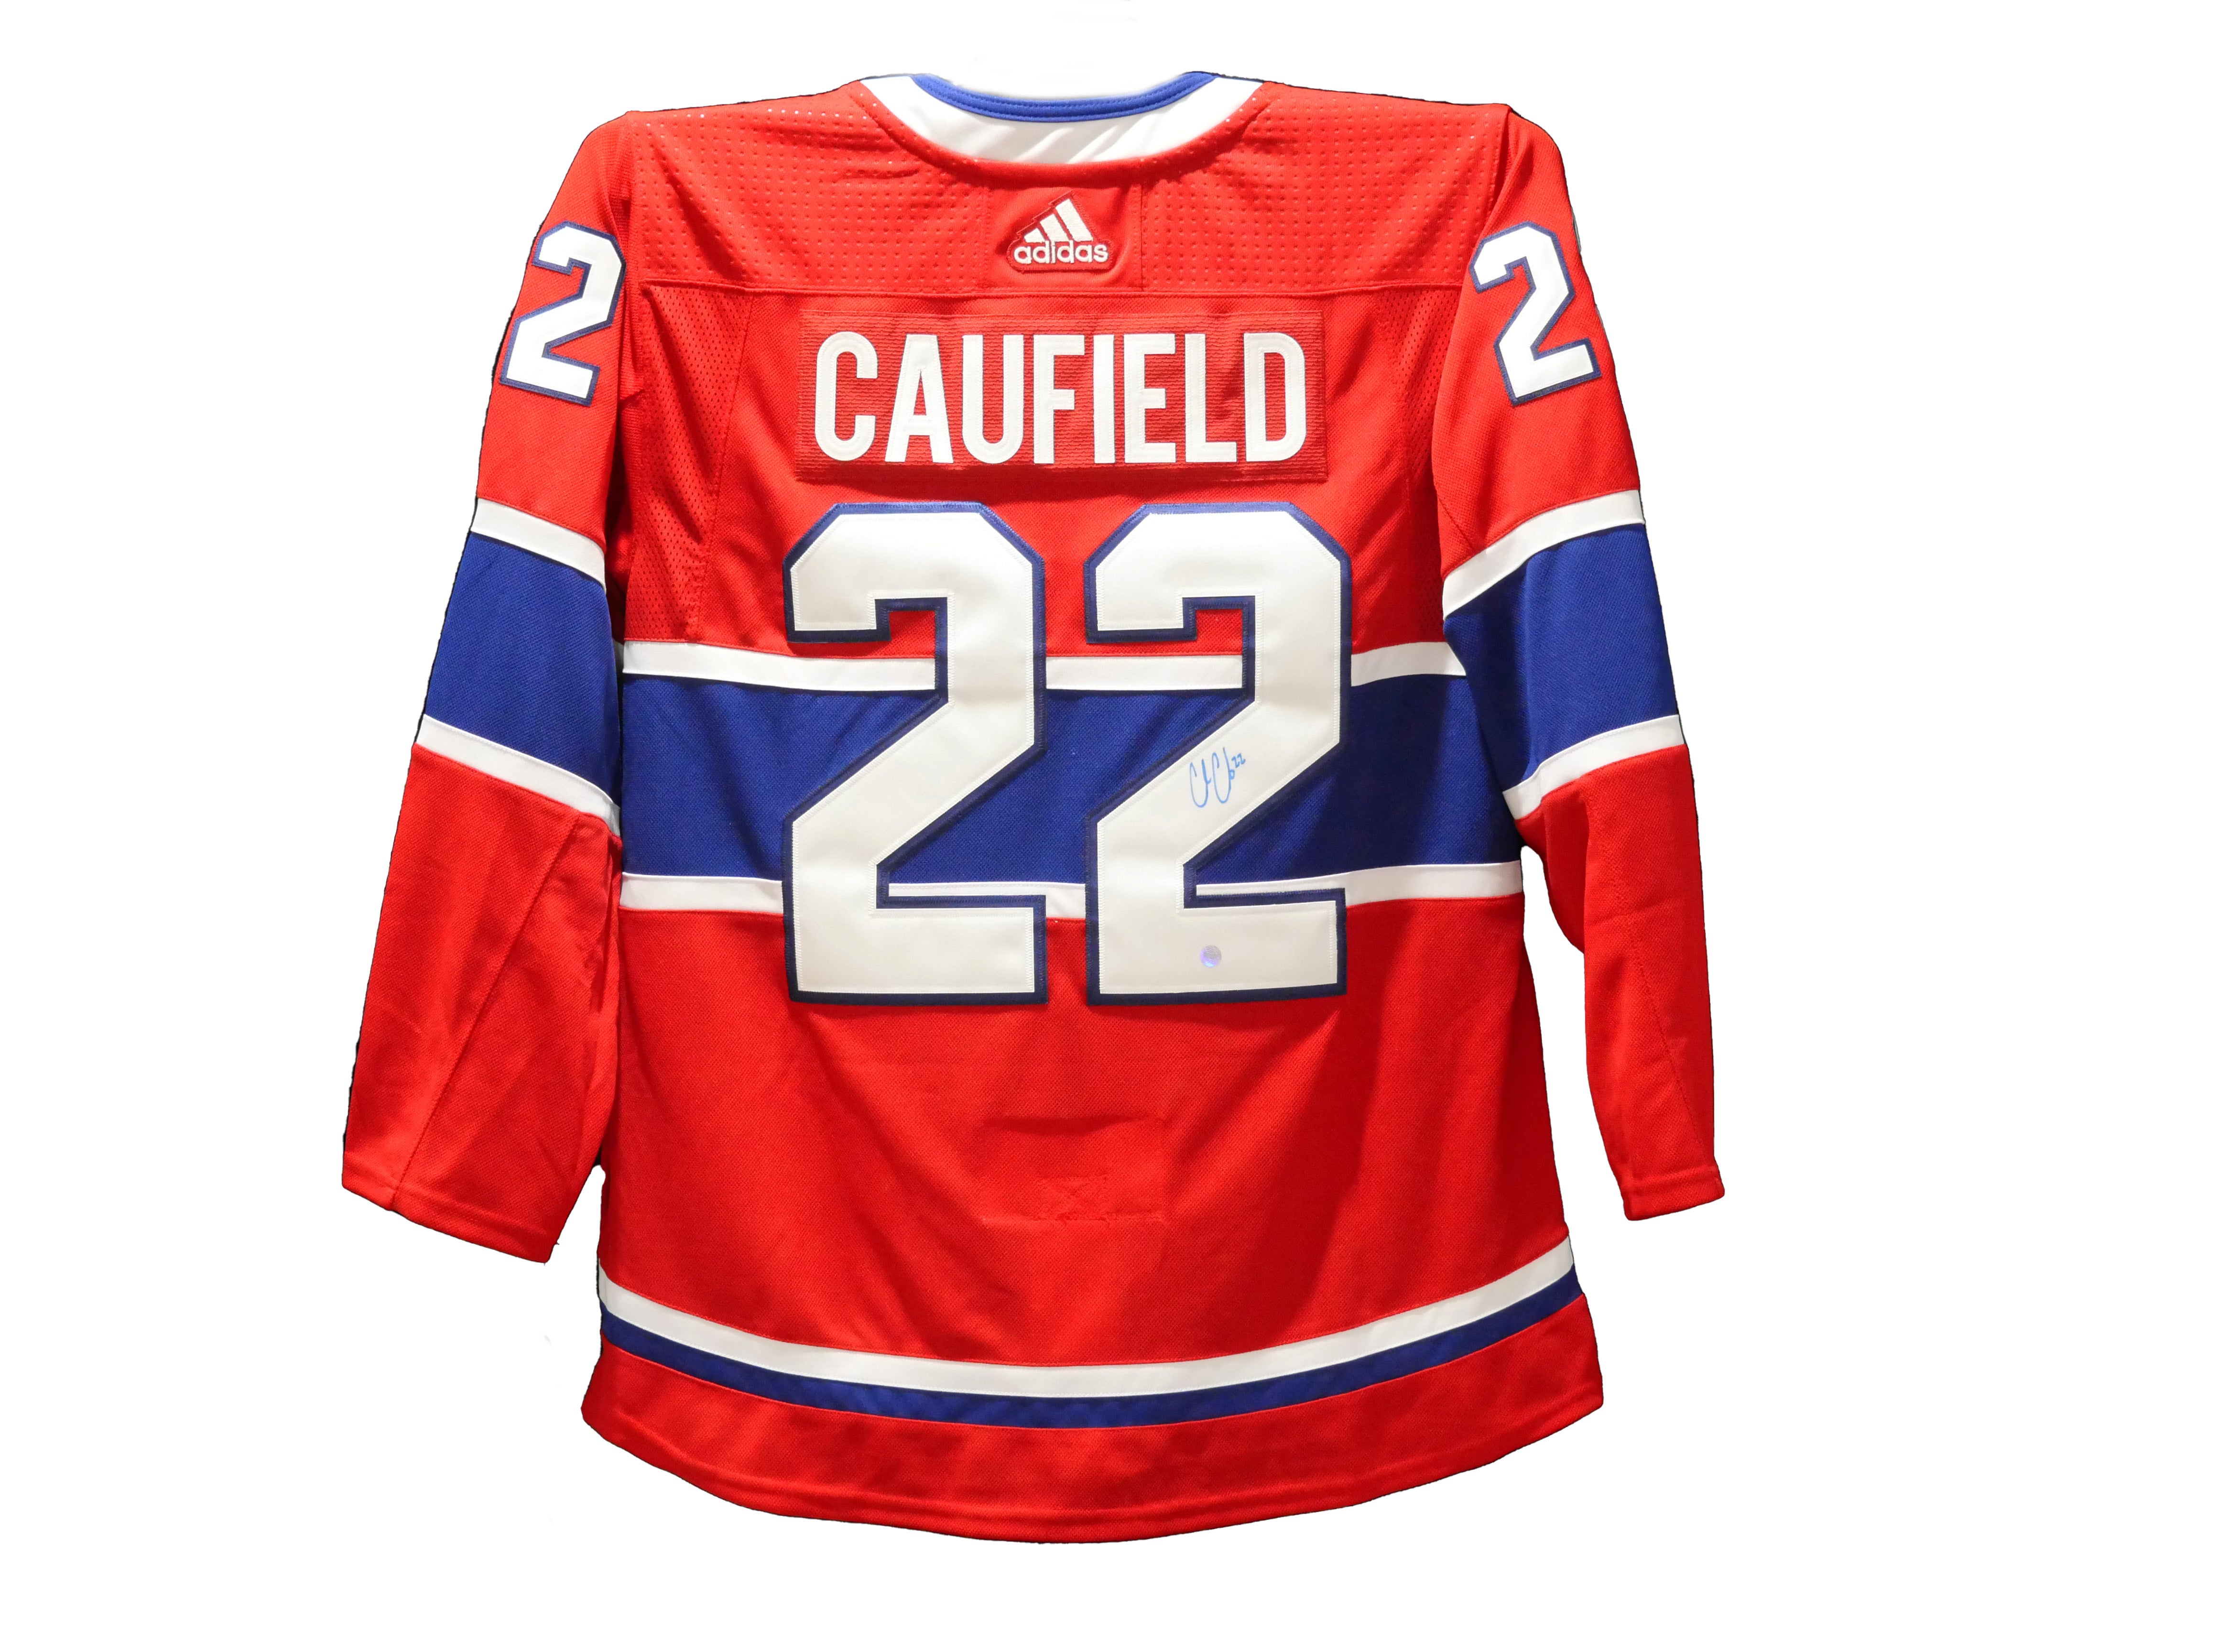 Cole Caufield Authentic Autographed Montreal Canadiens Home Jersey